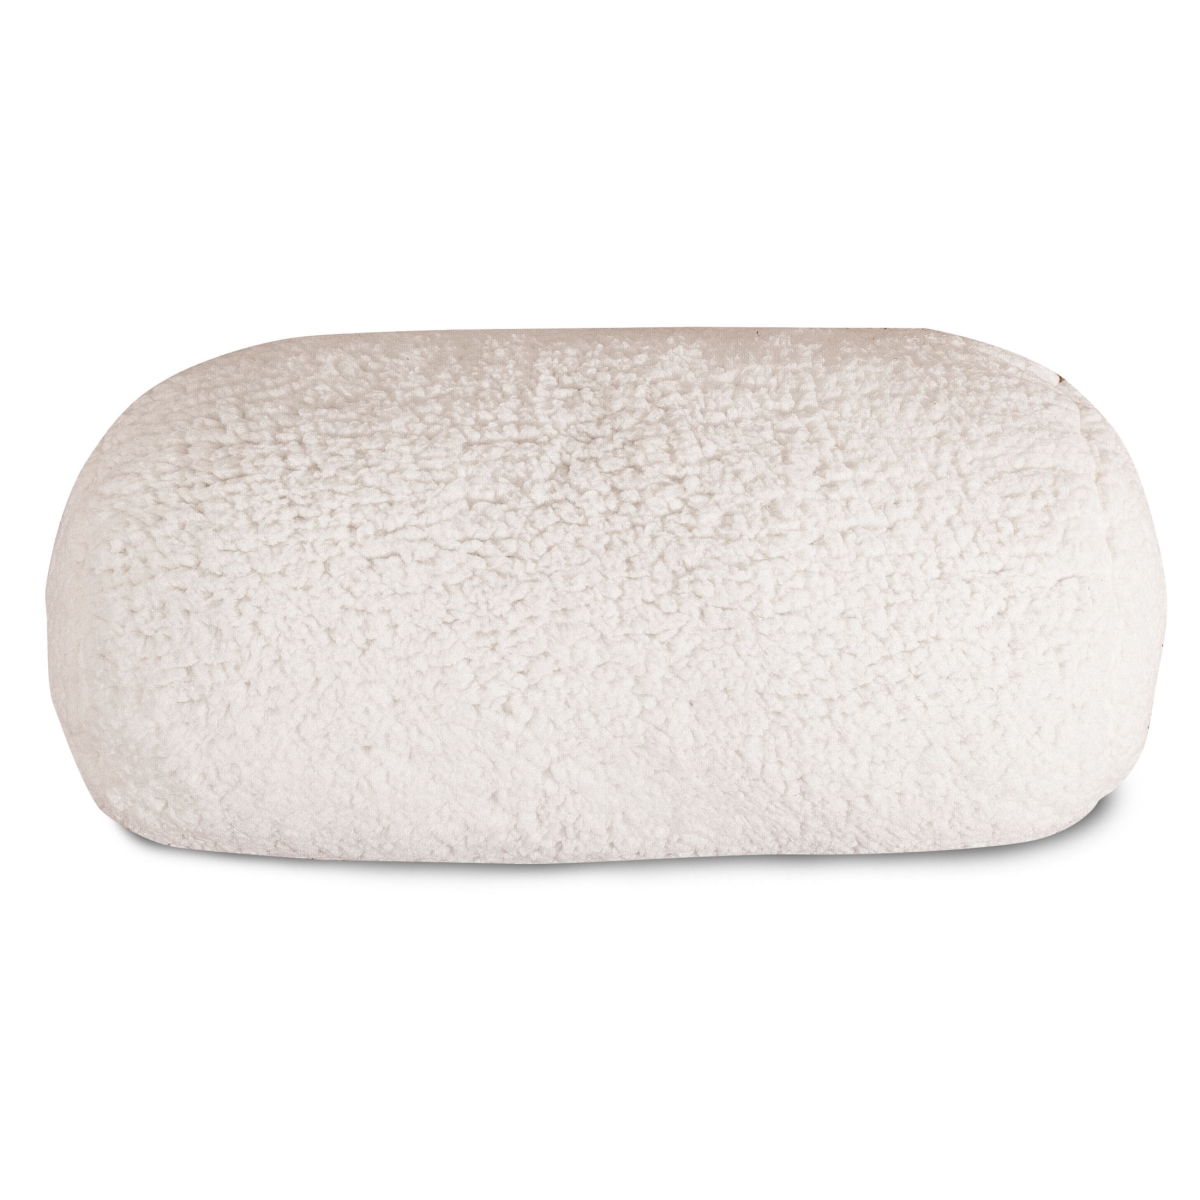 Majestic Home 85907262009 18.5 X 8 In. Solid Cream Sherpa Round Bolster